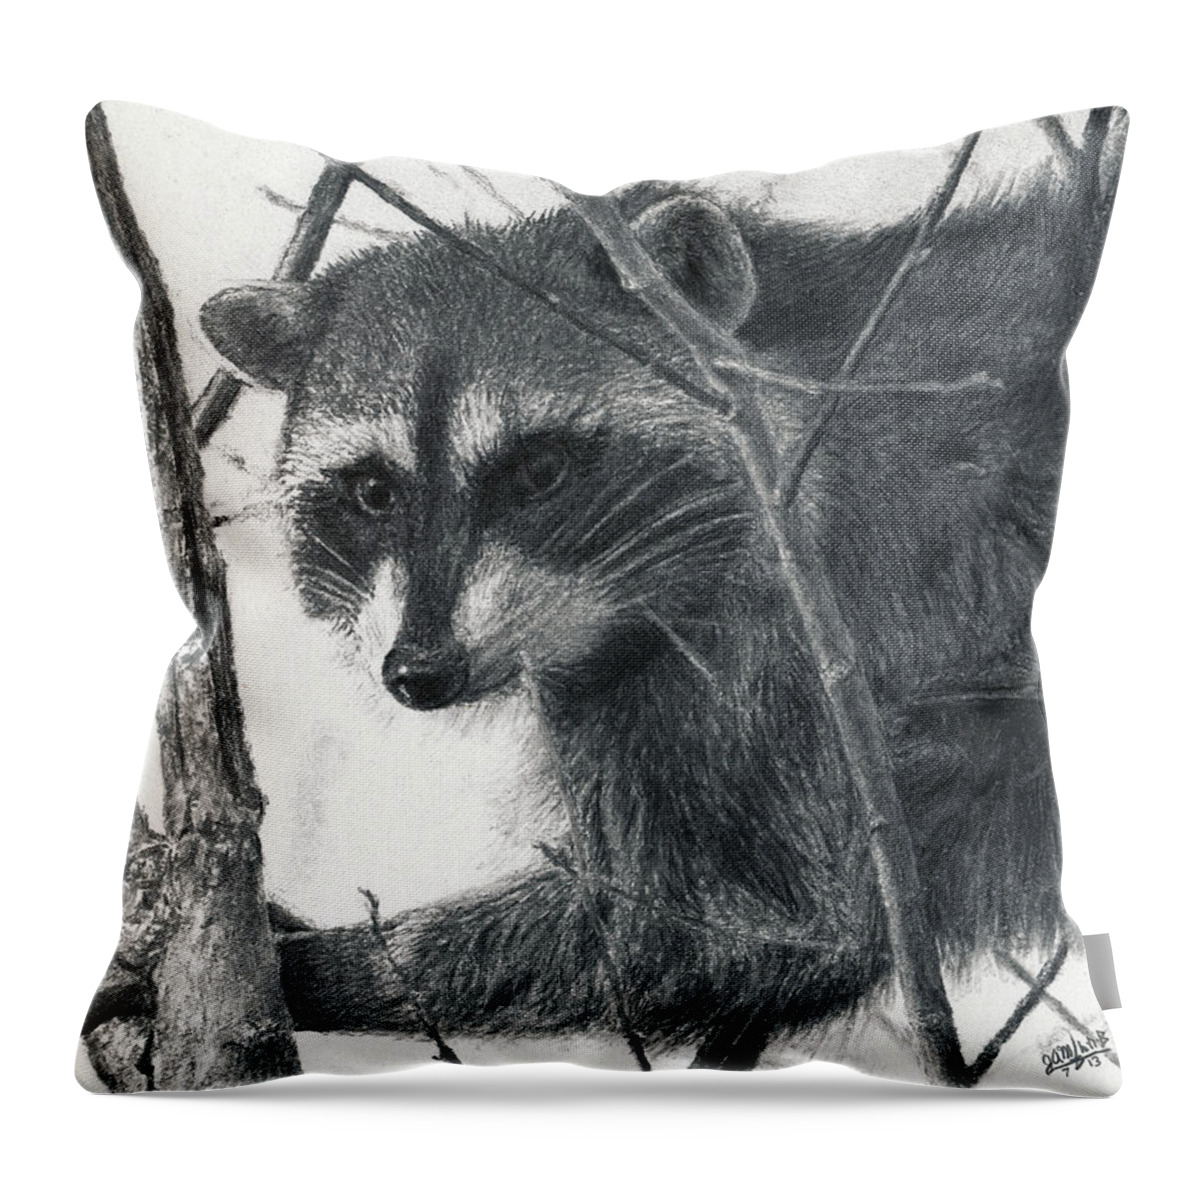 Animal Throw Pillow featuring the drawing Raccoon - Charcoal Experiment by Joshua Martin